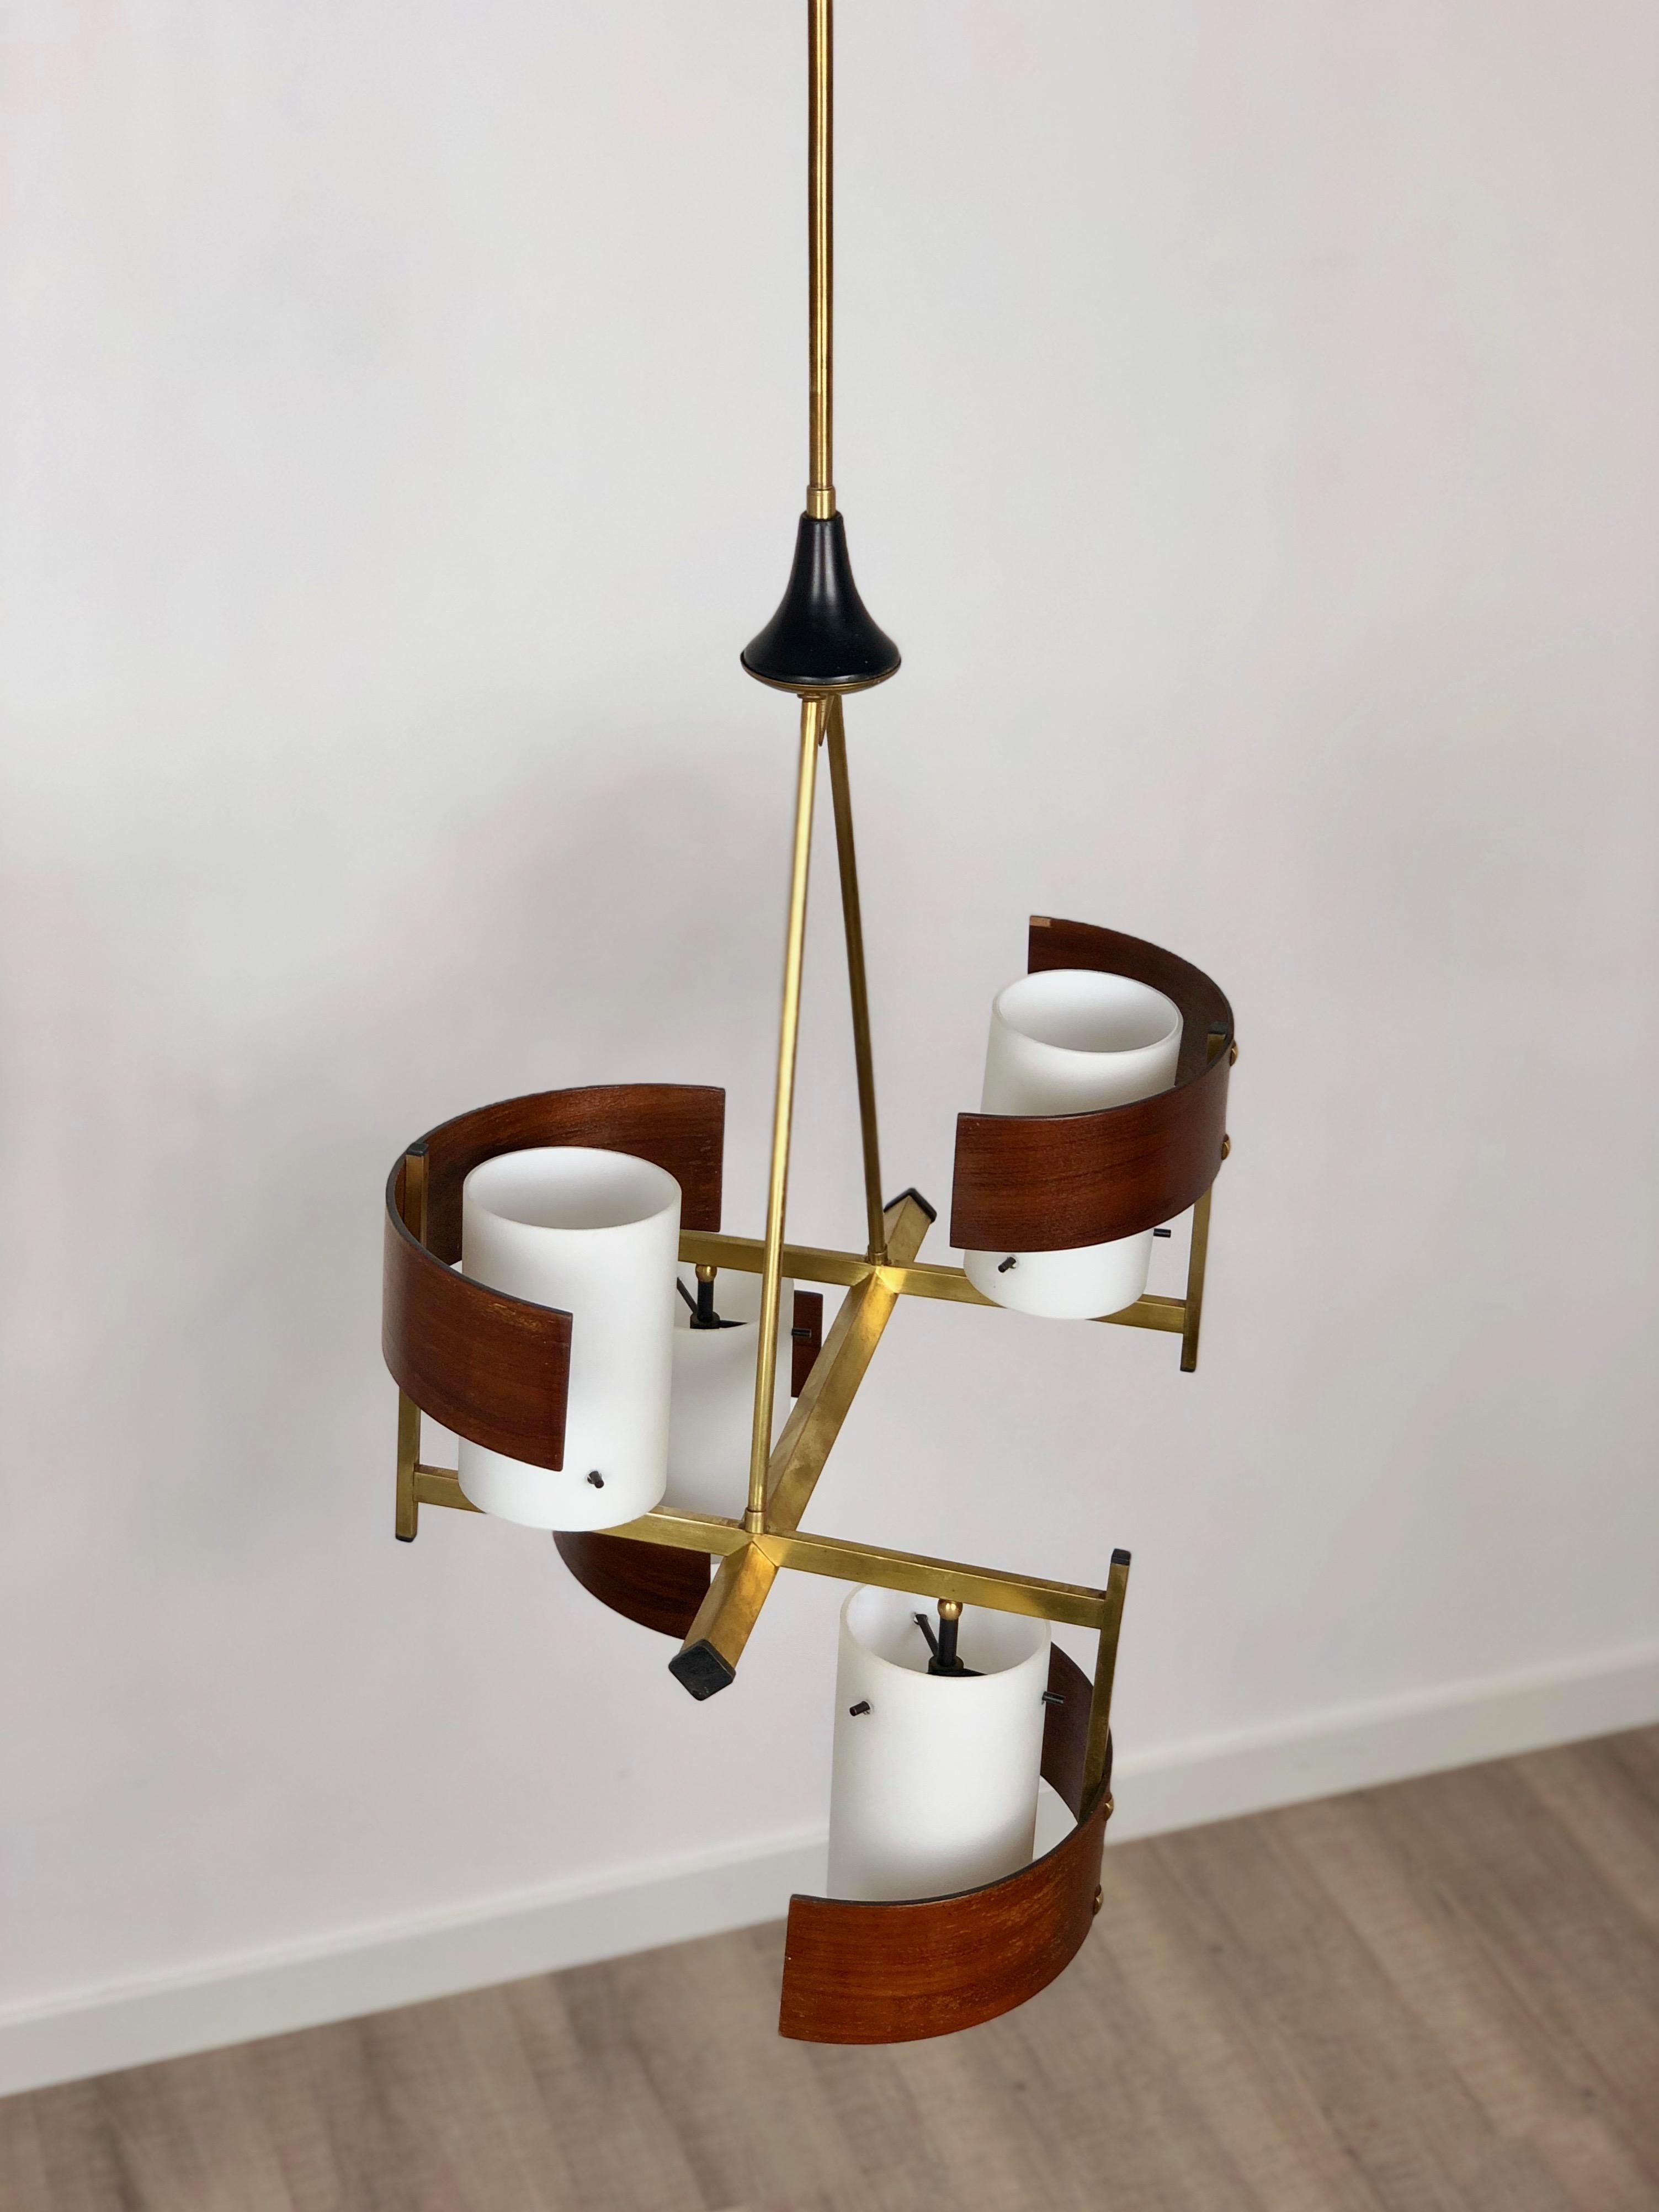 Italian modernist chandelier with 4 white opaline glass shades embellished with brass and teak frame and details. Typical modernist piece of the 1960s.